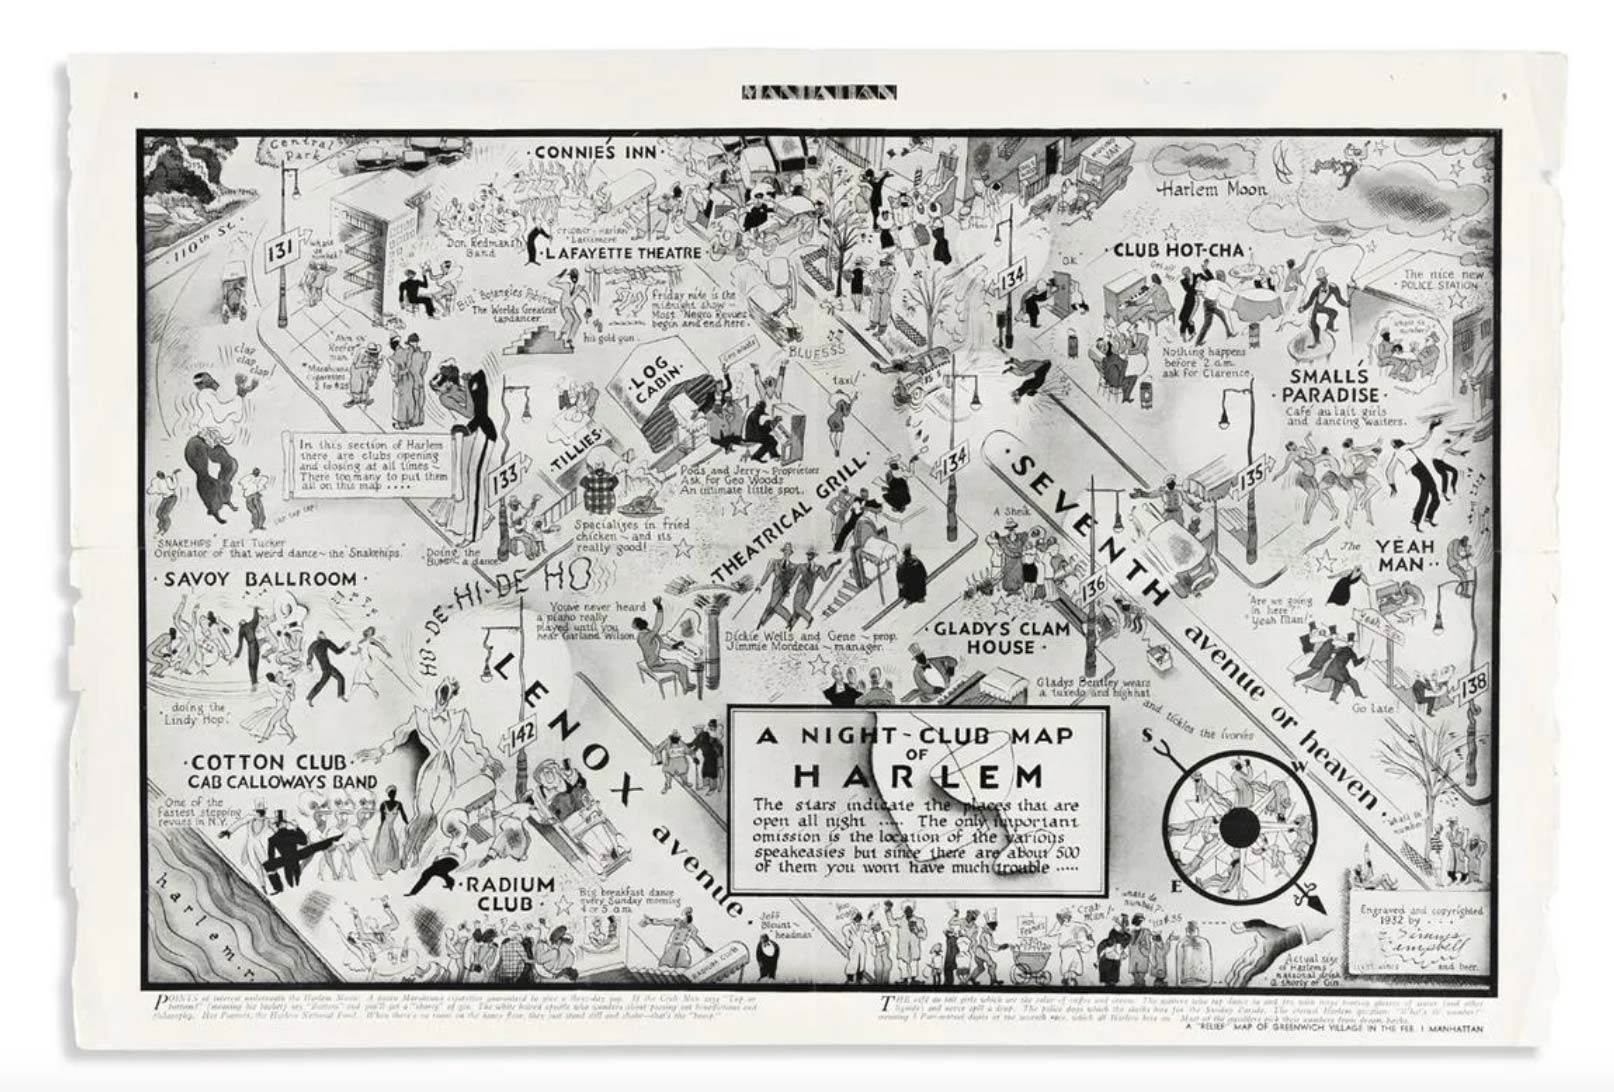 E. Simms Campbell, artist, 'A Night-Club Map of Harlem,' $15,000-$25,000. Image courtesy Swann's Auction Galleries